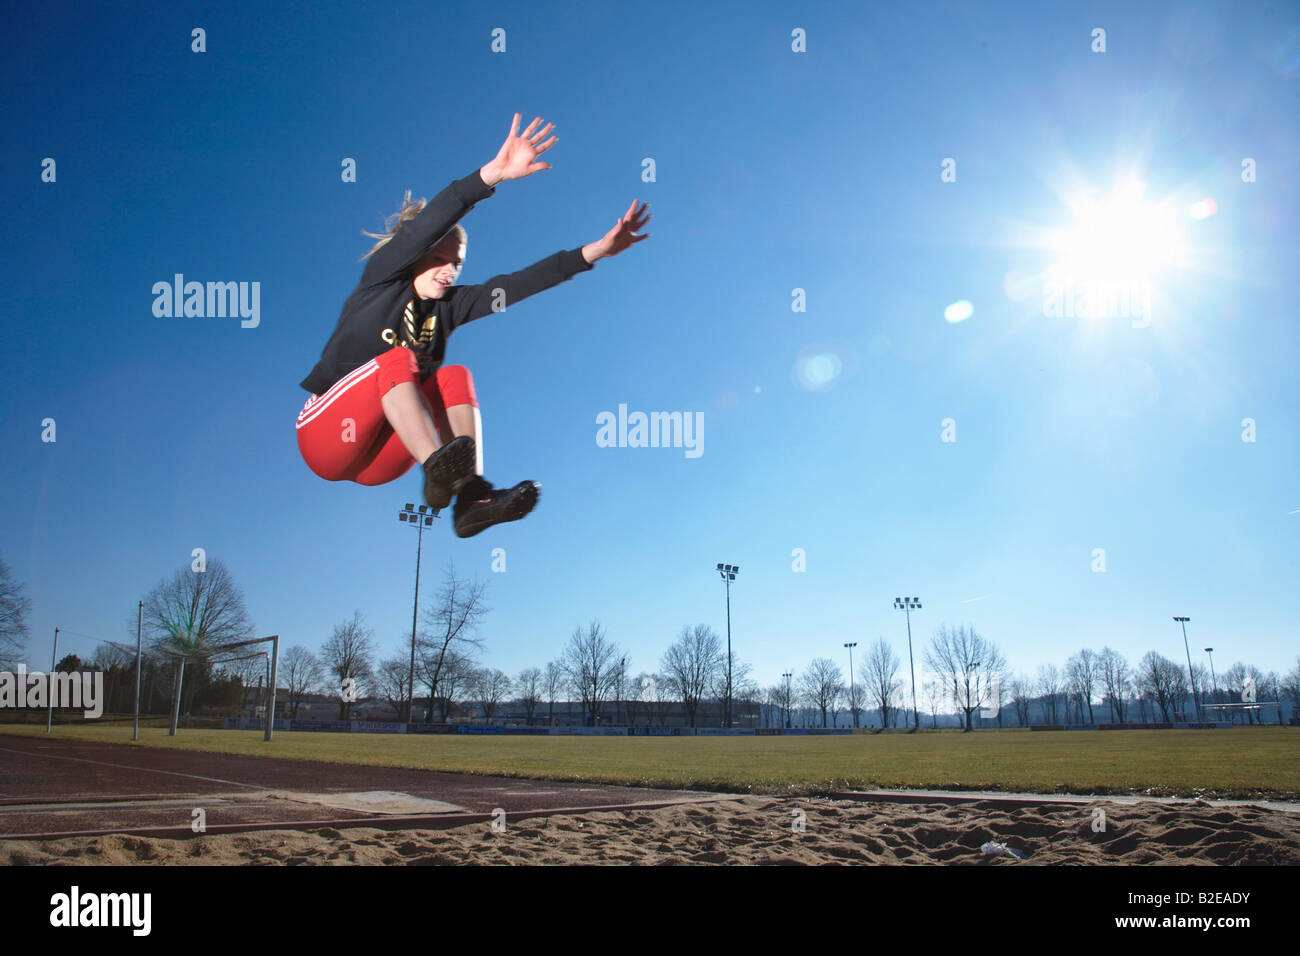 Female long jumper in mid-air Stock Photo